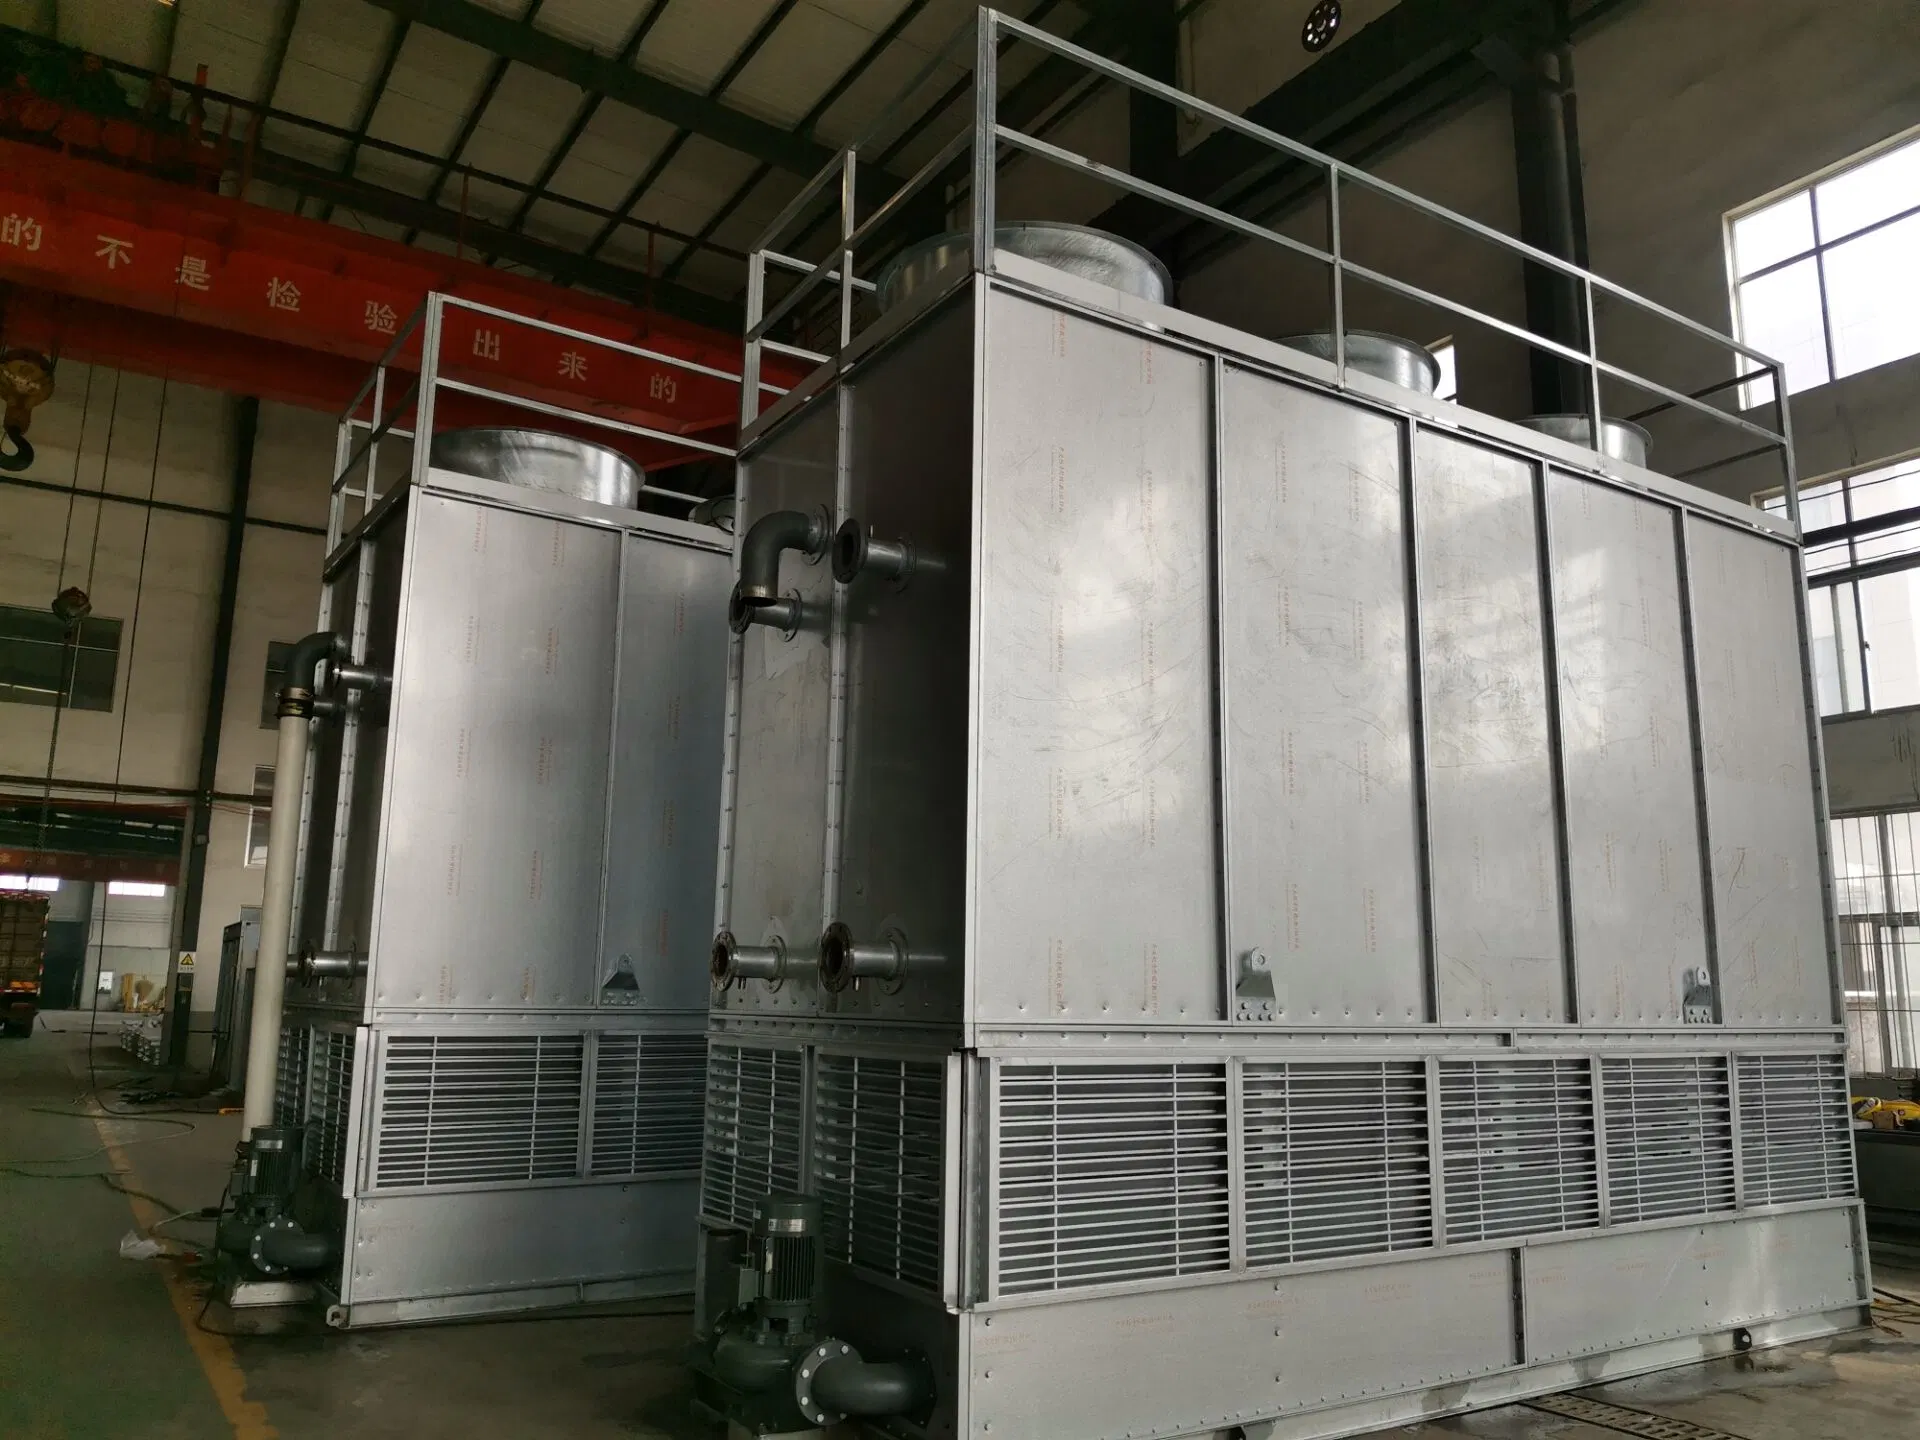 Vacuum Brazing Furnace Working Is Equip with Closed Cooling Tower to Protect It